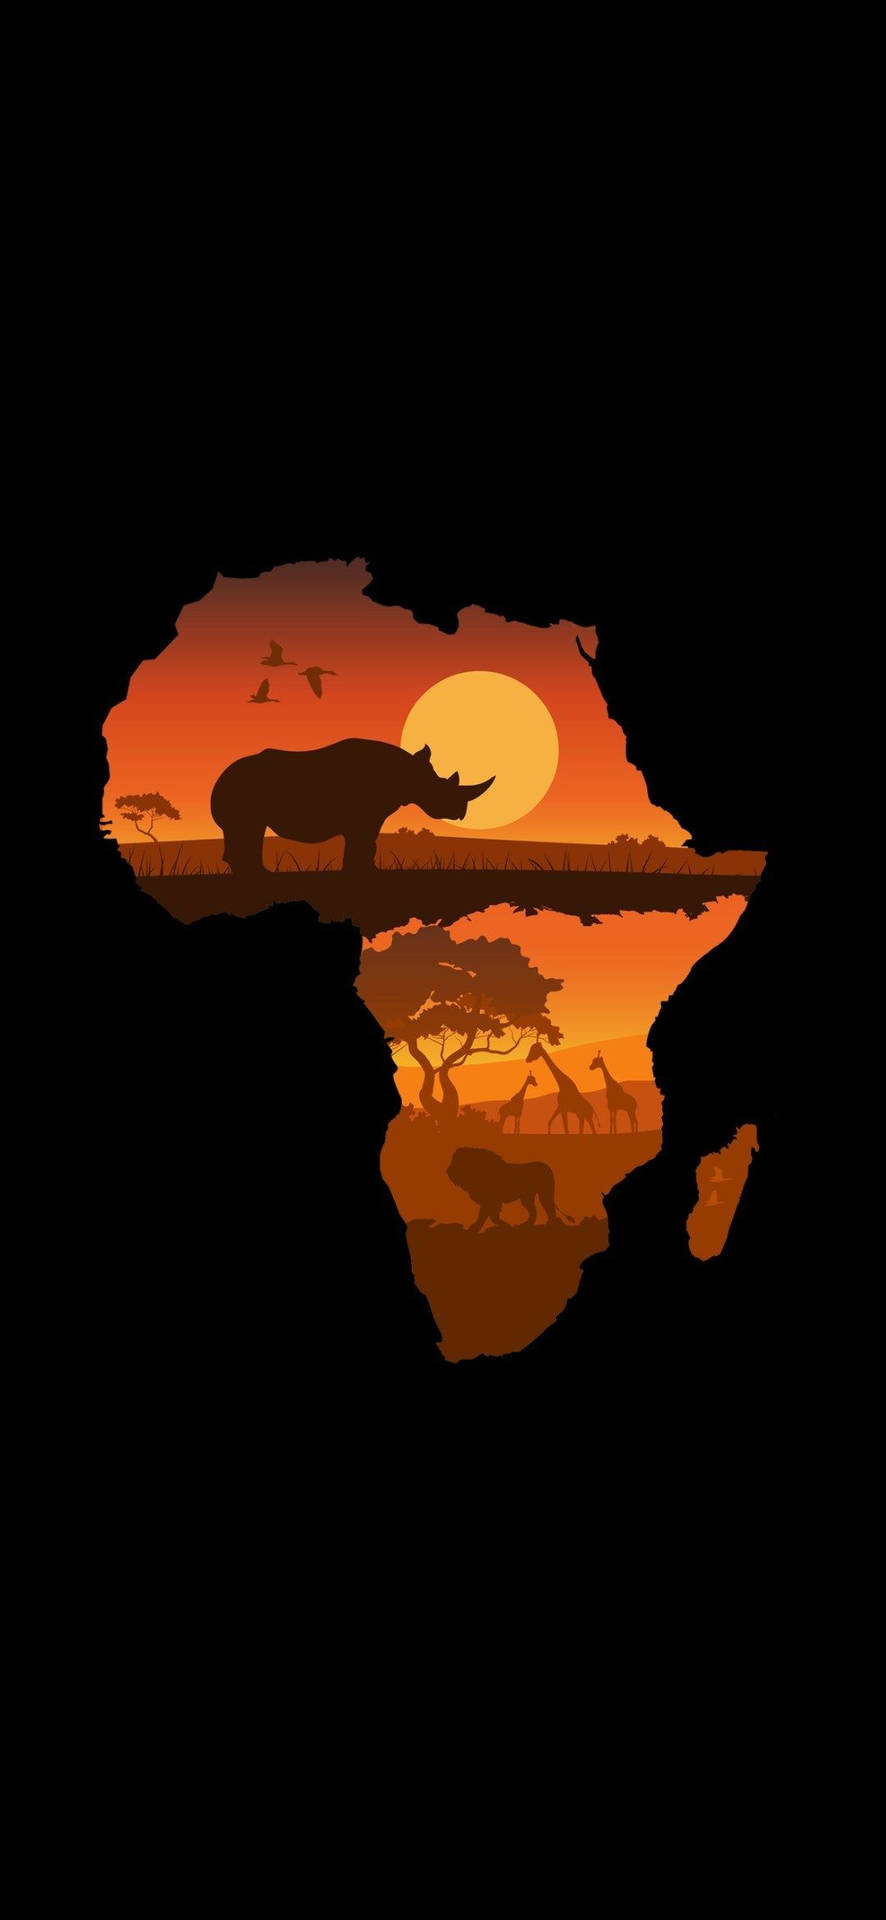 Animals And Continent Africa Iphone Background